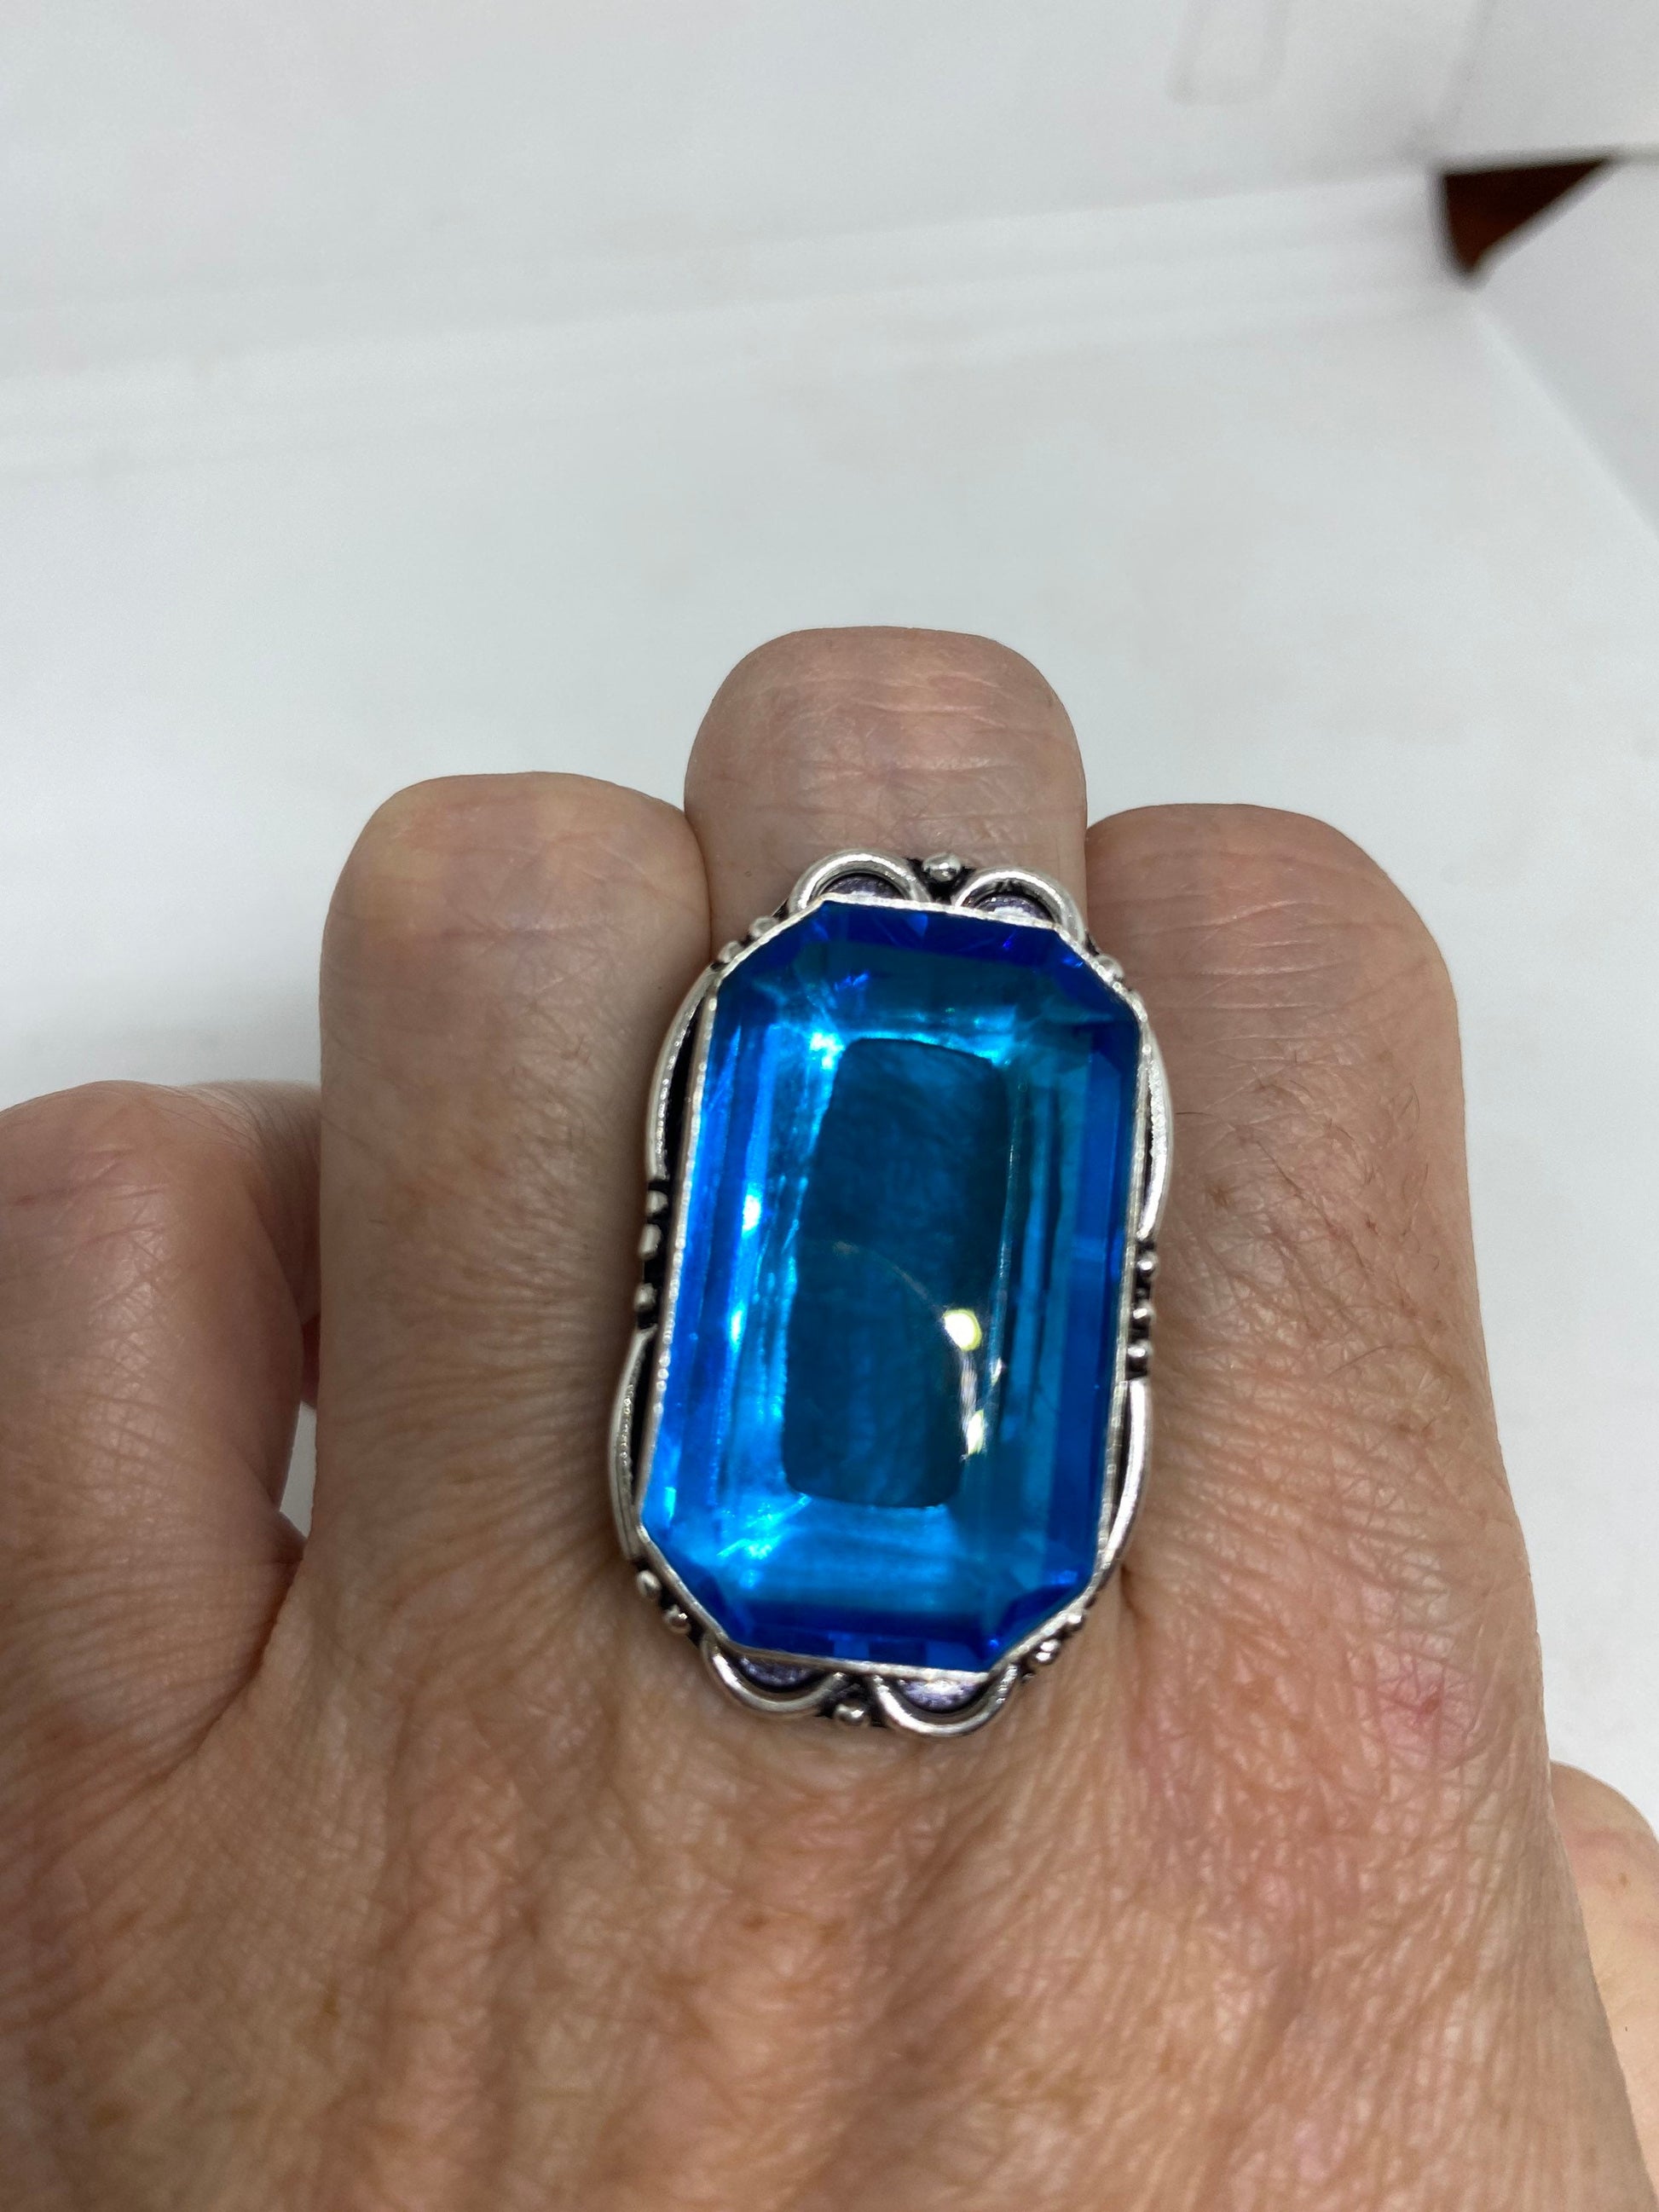 Vintage Aqua Vintage Art Glass Ring About 1 Inch Knuckle Ring